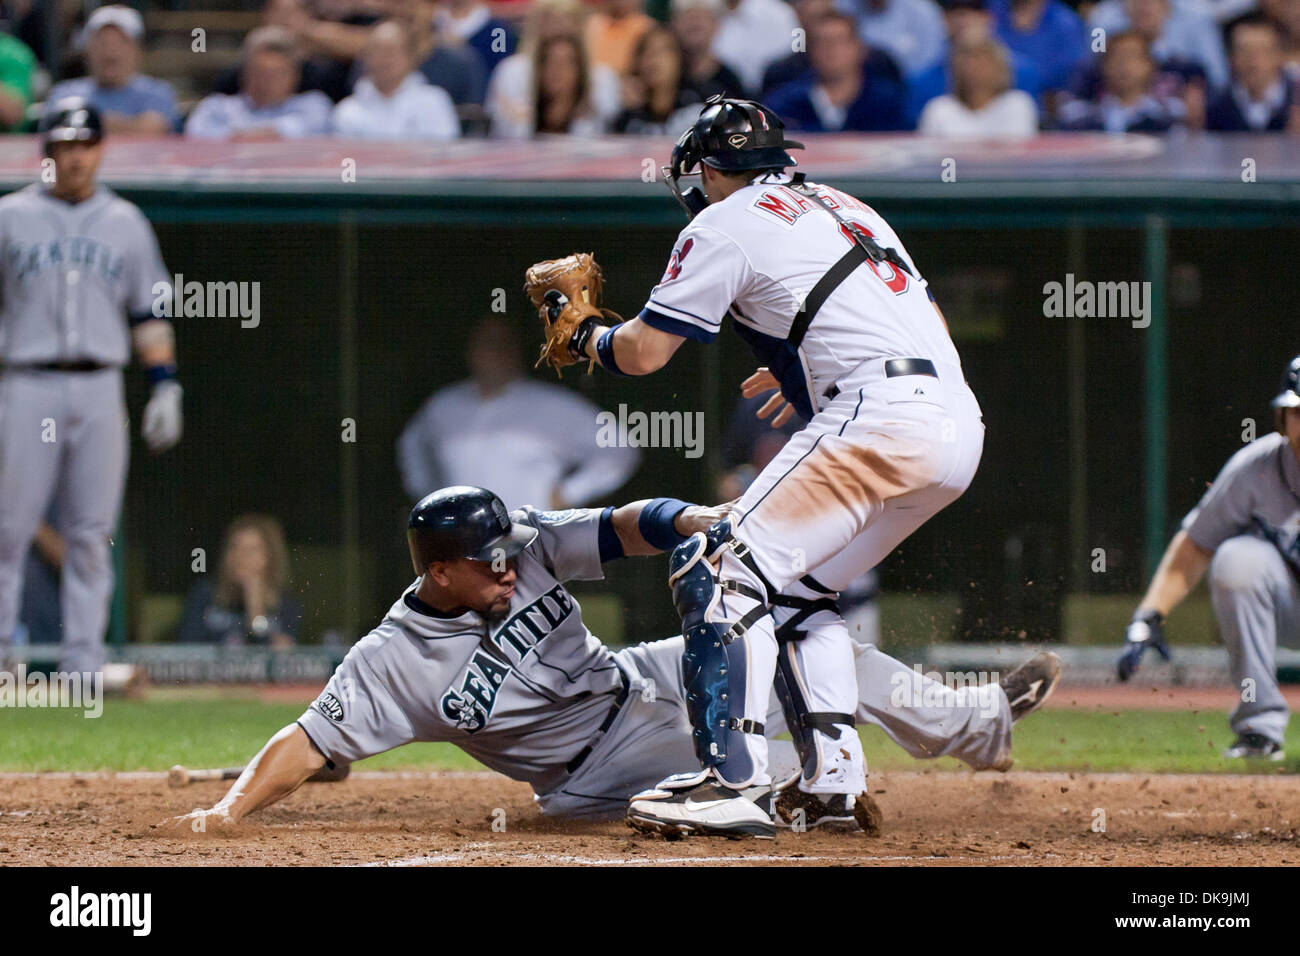 Aug. 22, 2011 - Cleveland, Ohio, U.S - Seattle catcher Miguel Olivo (30) slides safely into home ahead of the tag by Cleveland catcher Lou Marson (6) during the ninth inning.  The Seattle Mariners defeated the Cleveland Indians 3-2 at Progressive Field in Cleveland, Ohio. (Credit Image: © Frank Jansky/Southcreek Global/ZUMAPRESS.com) Stock Photo